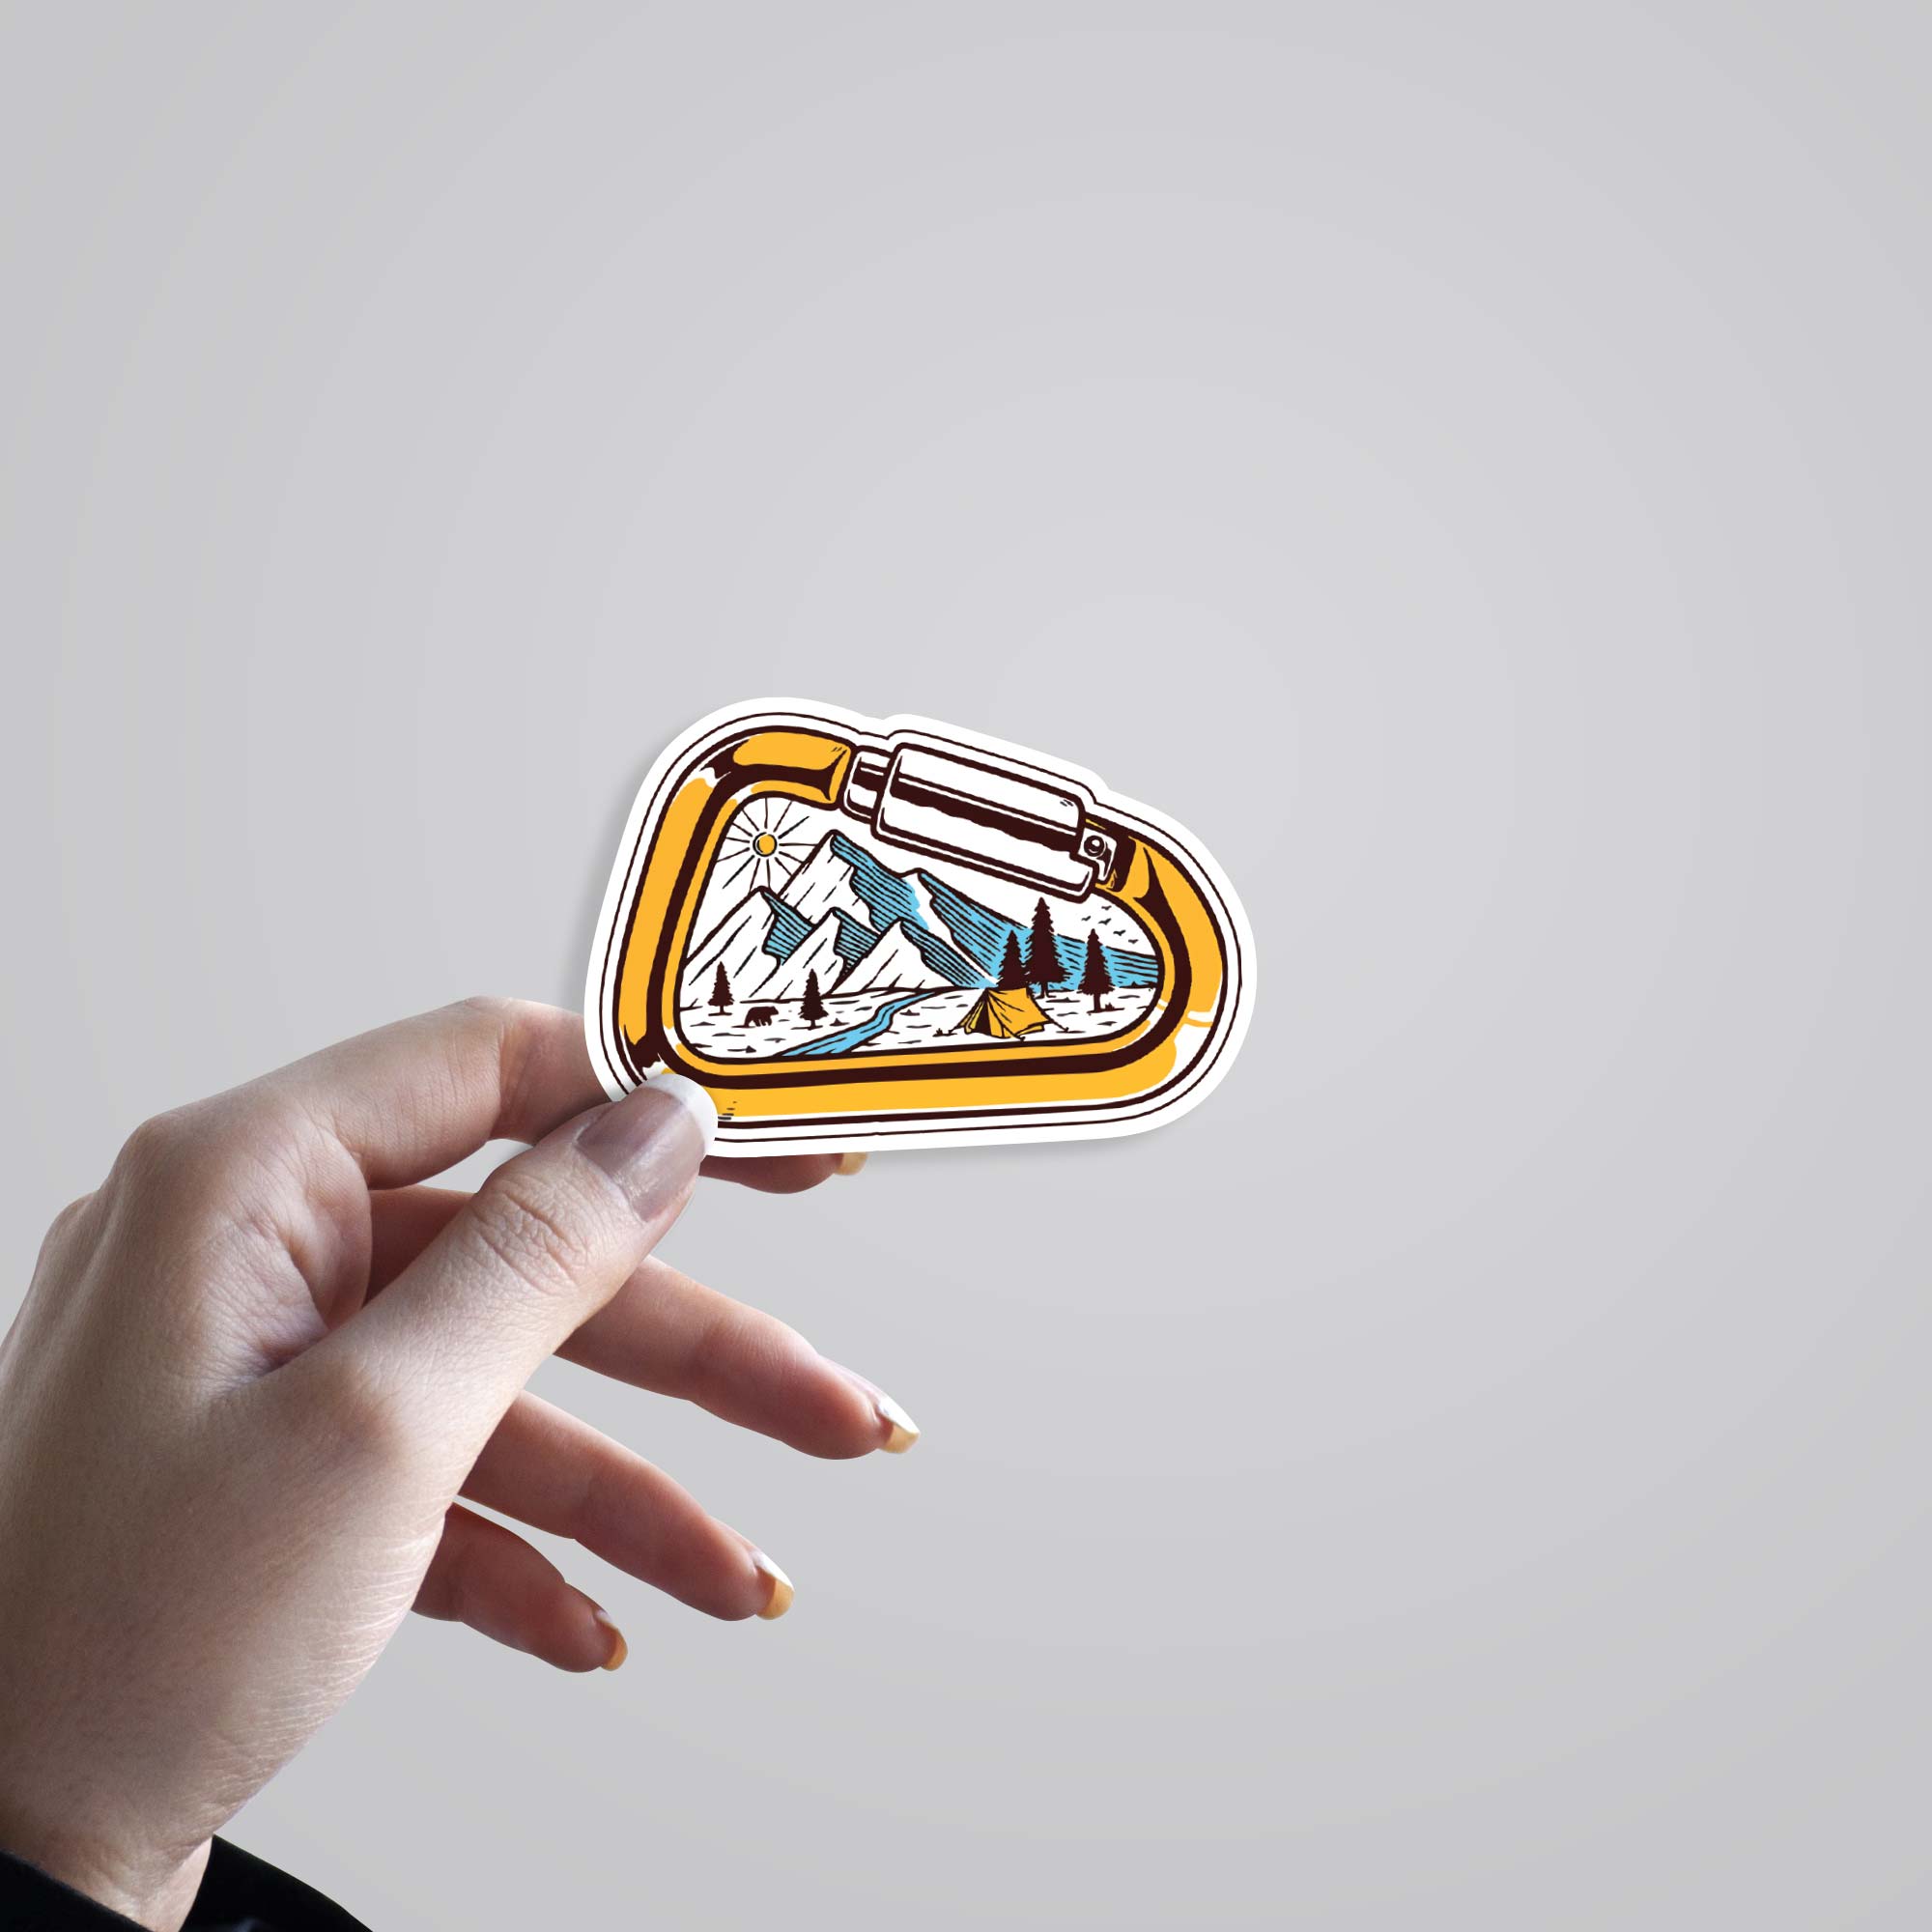 Mountains in Carabiner Travels Stickers